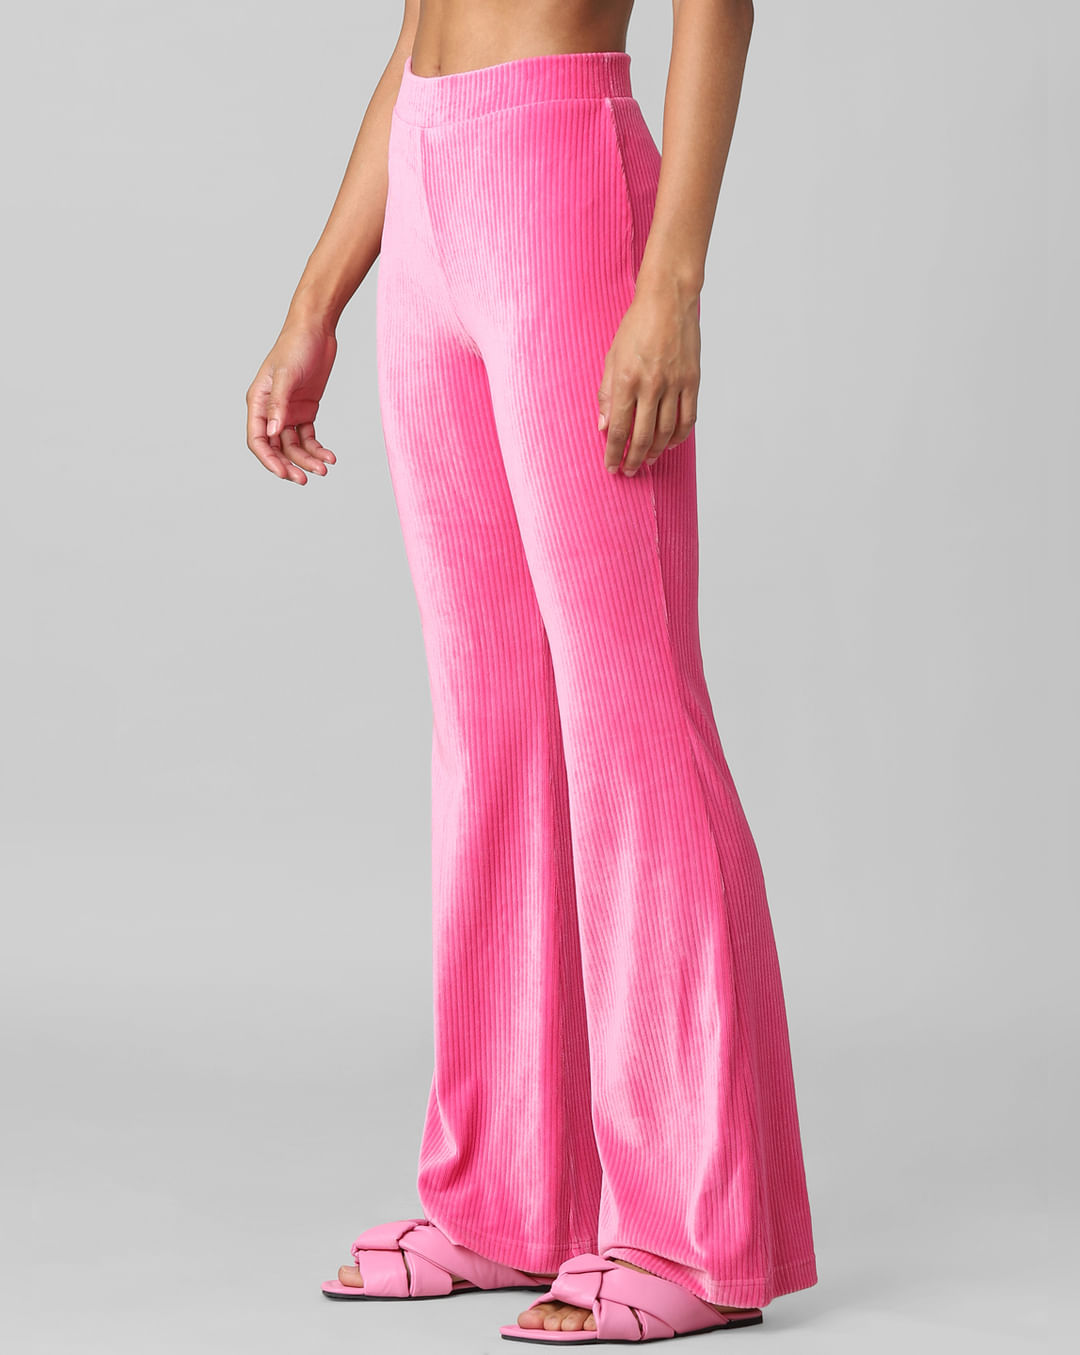  Pink Flare Pants